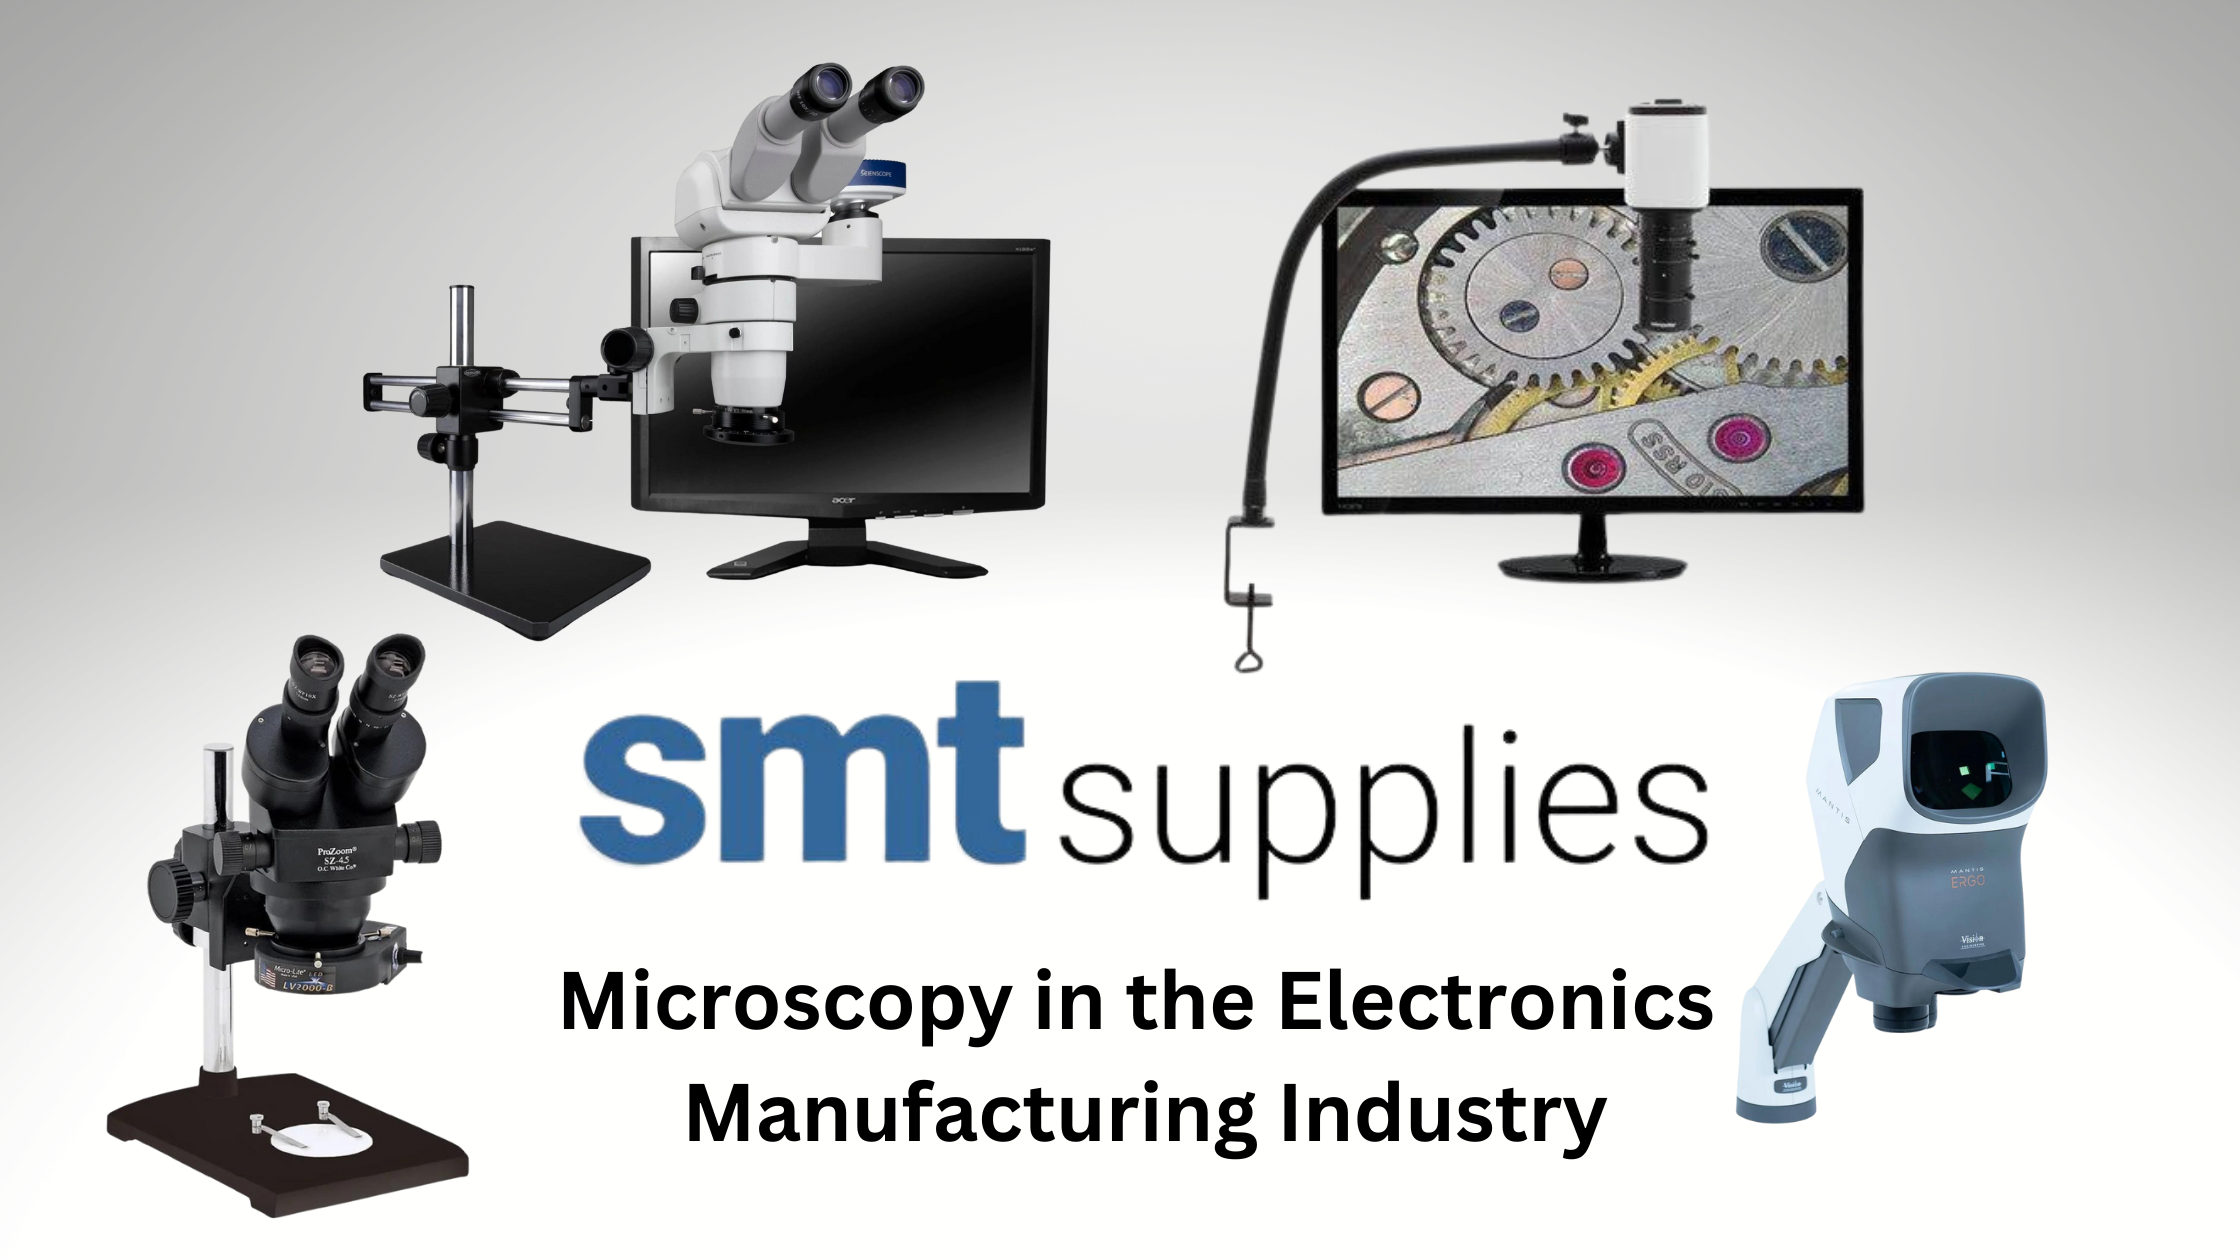 Microscopy in the Electronics Manufacturing Industry: The Differences between Binocular, Trinocular, Digital and Hybrid Systems